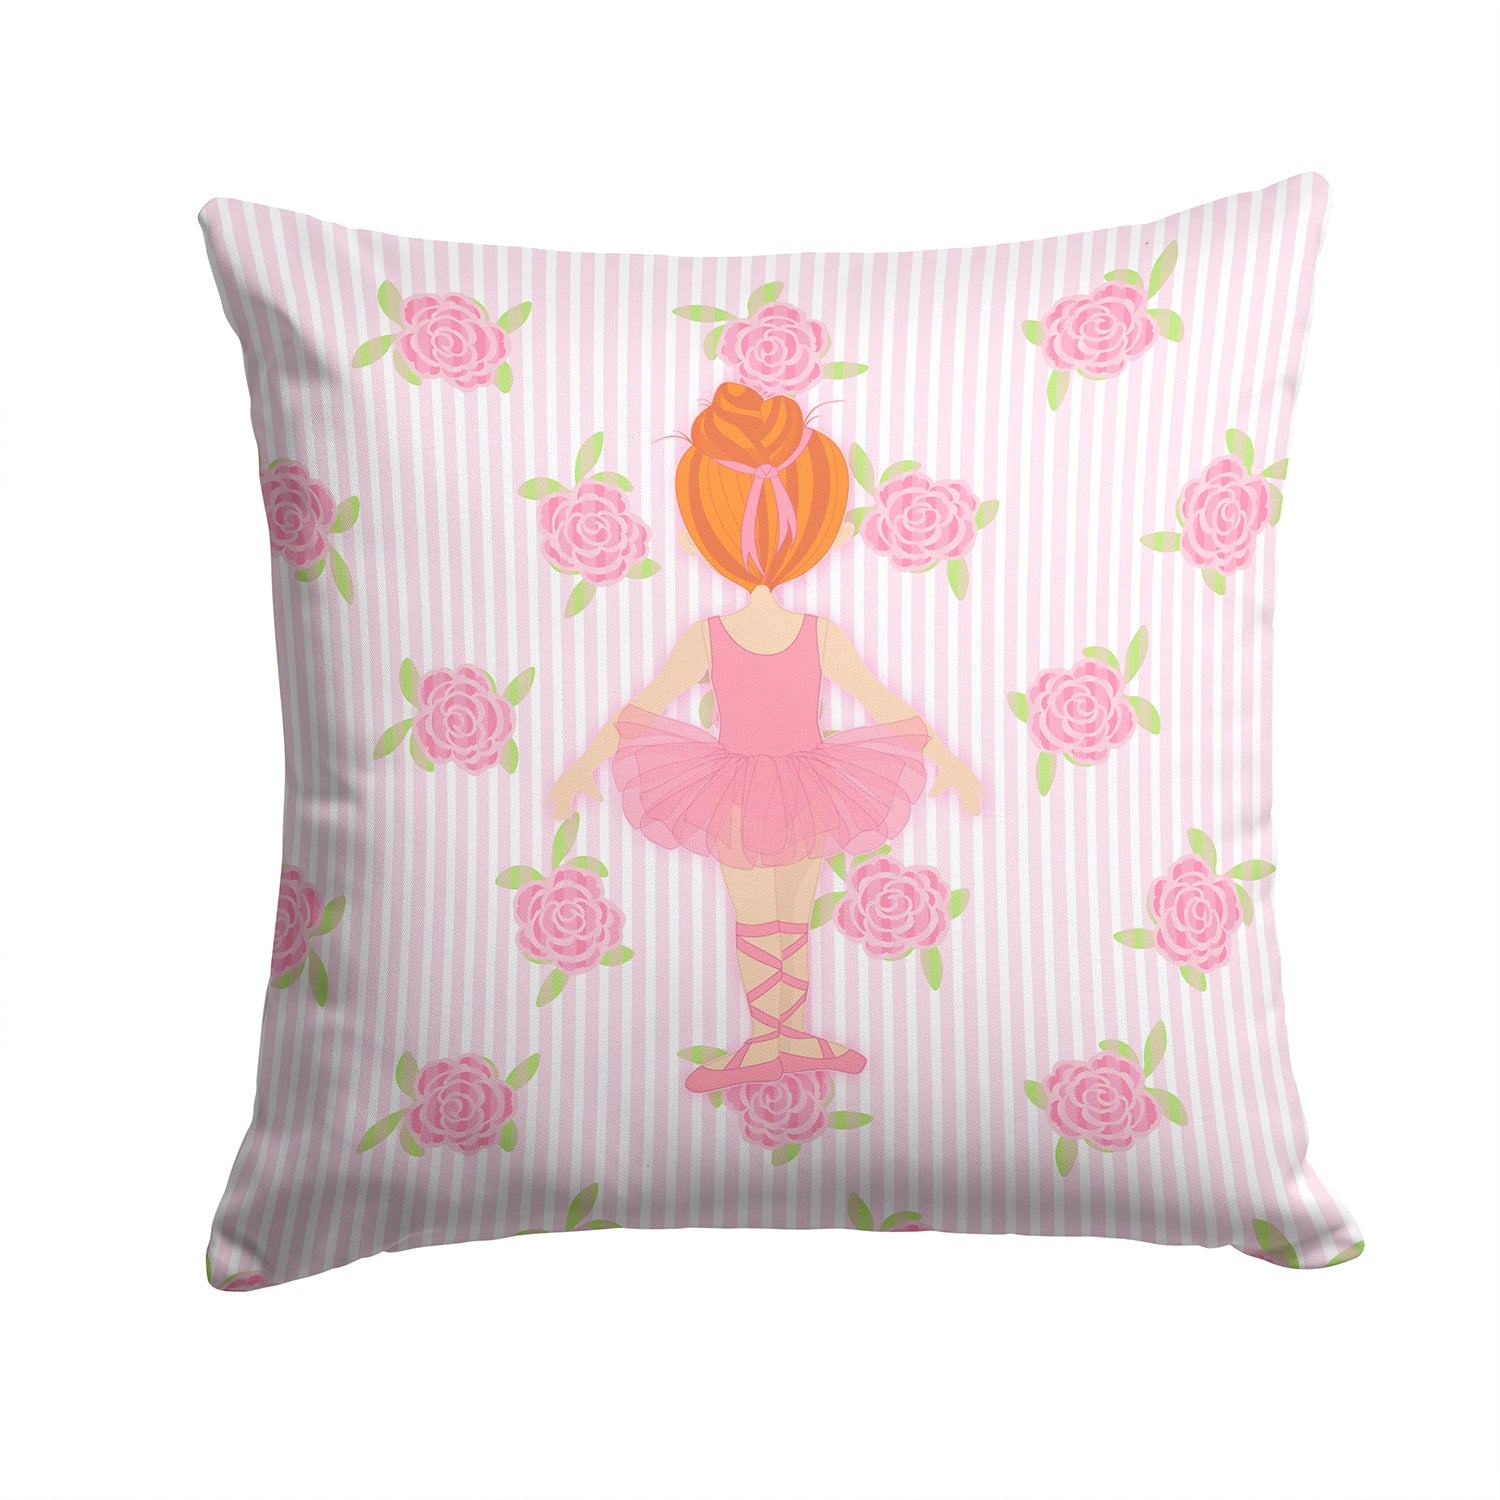 Ballerina Red Head Back Pose Fabric Decorative Pillow BB5163PW1414 - the-store.com